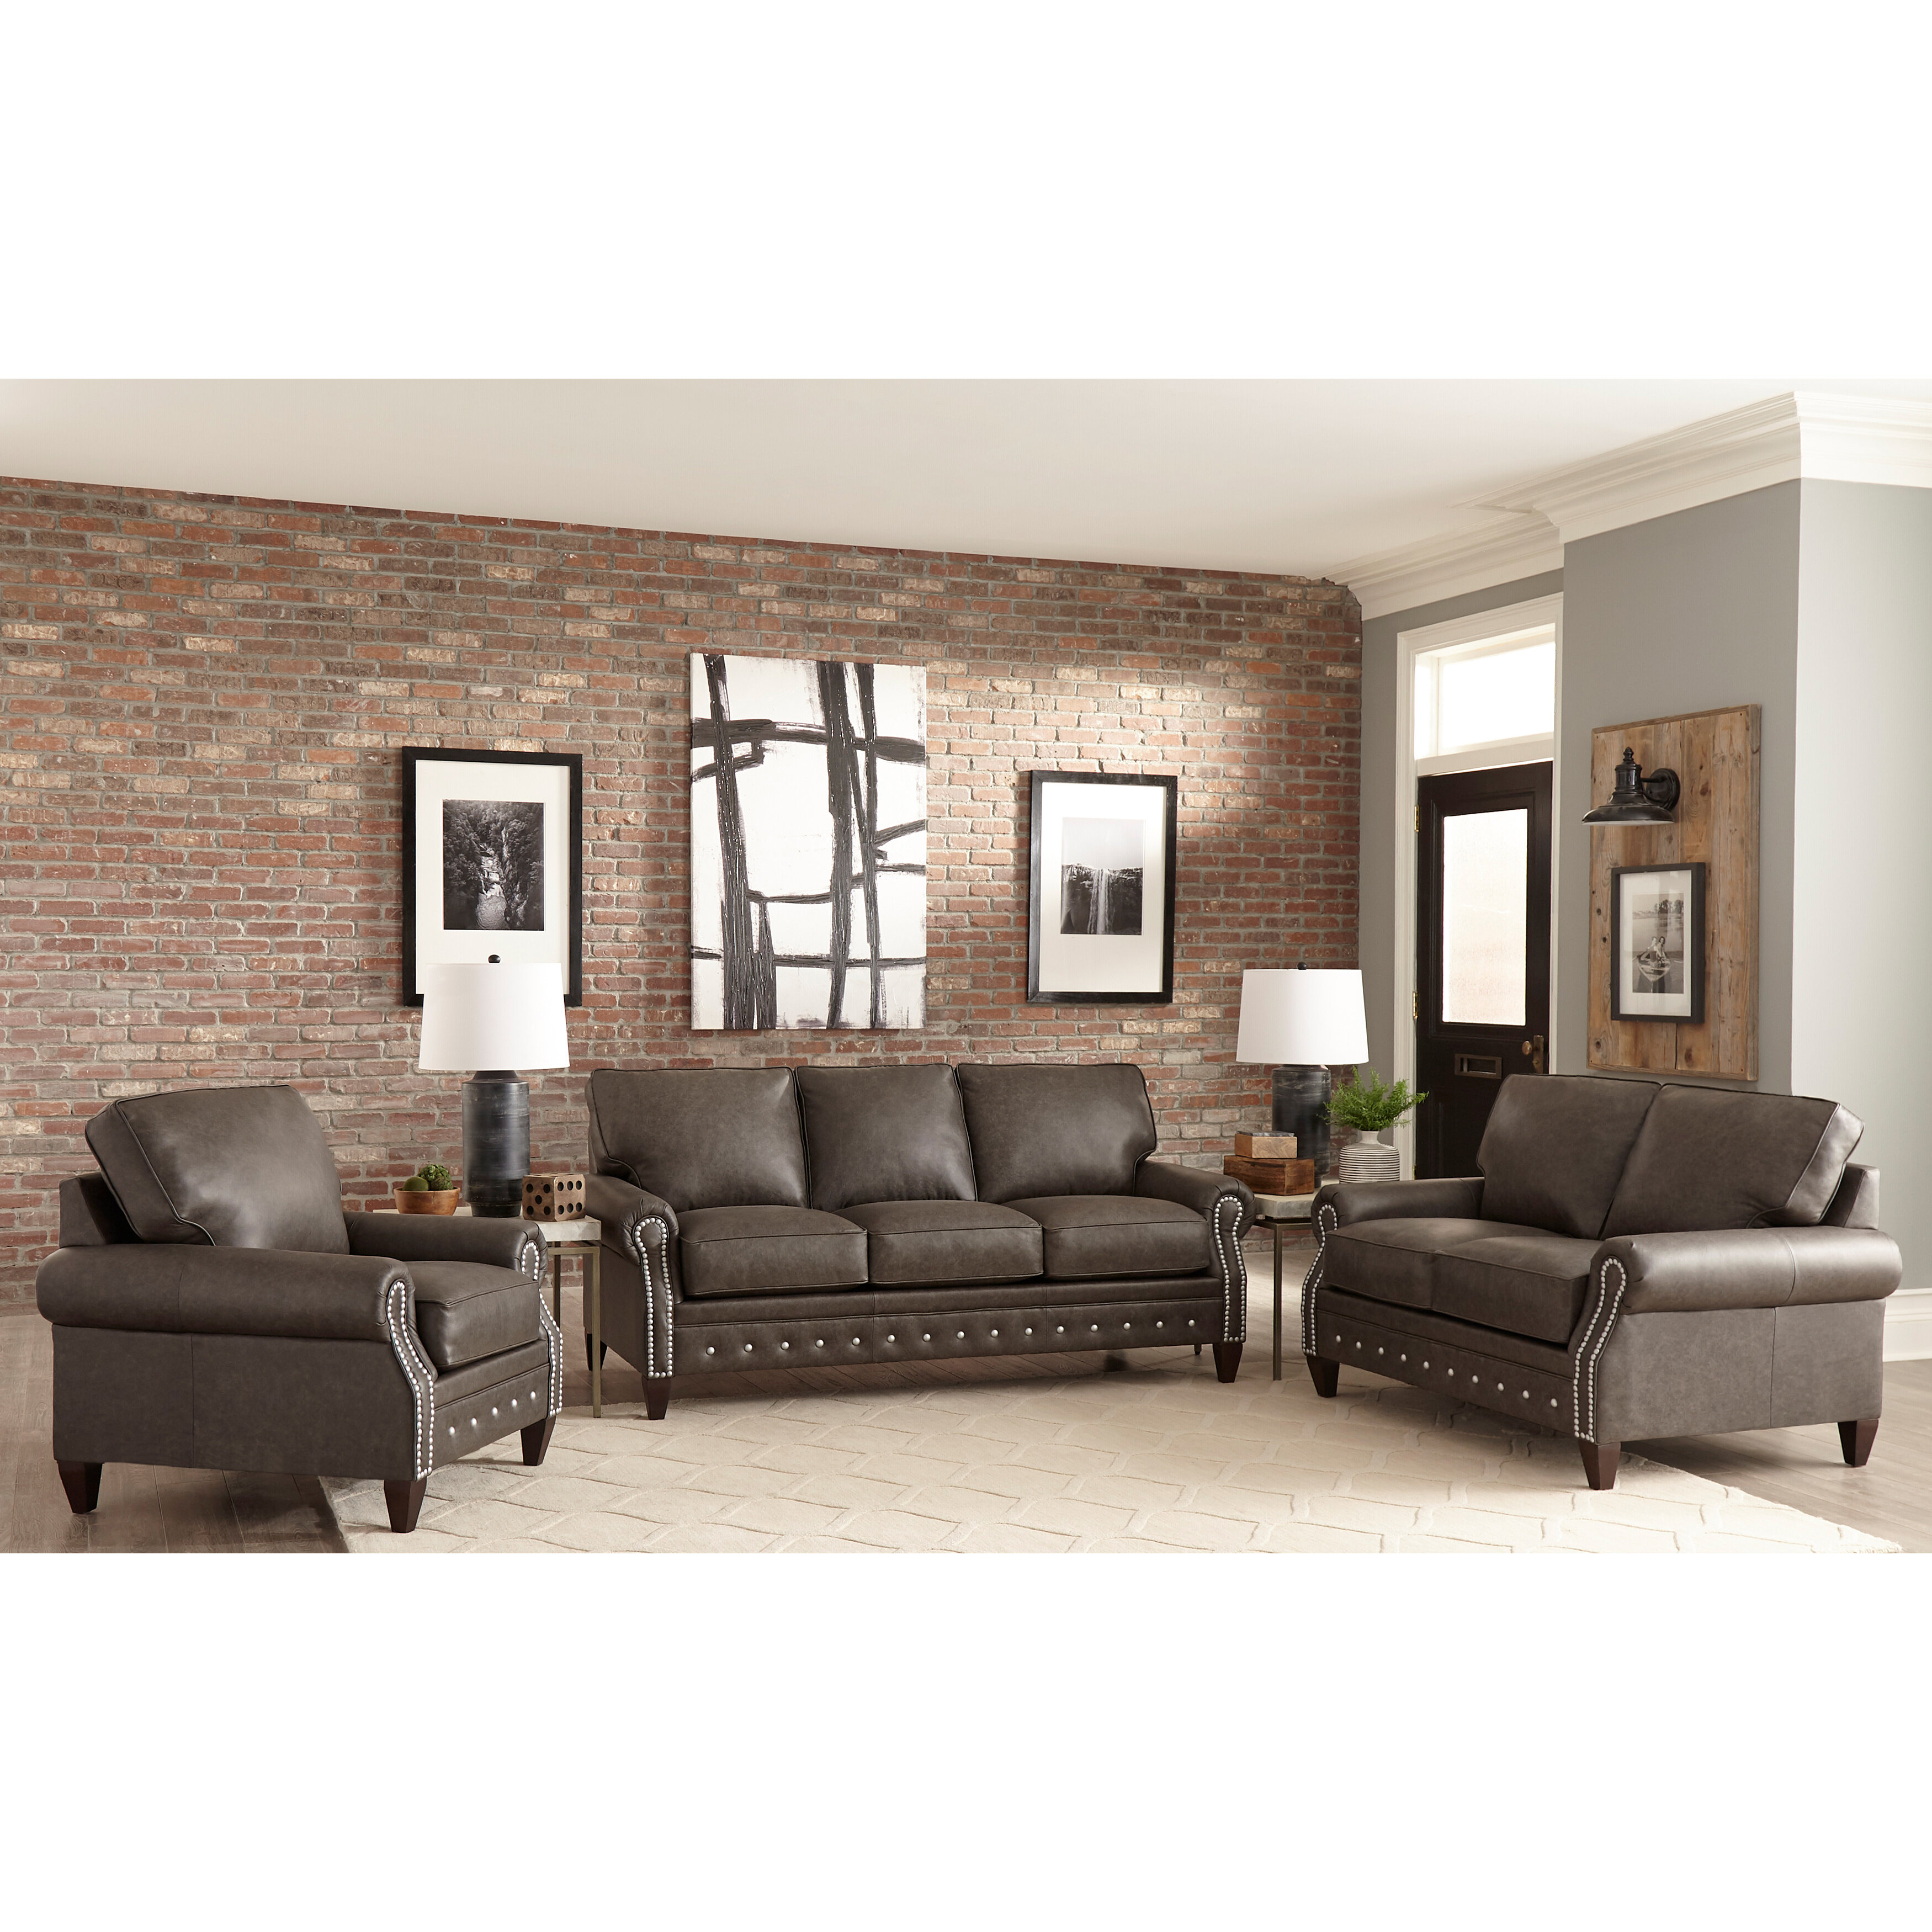 17 Stories Jacey 3 Piece Leather Living Room Set